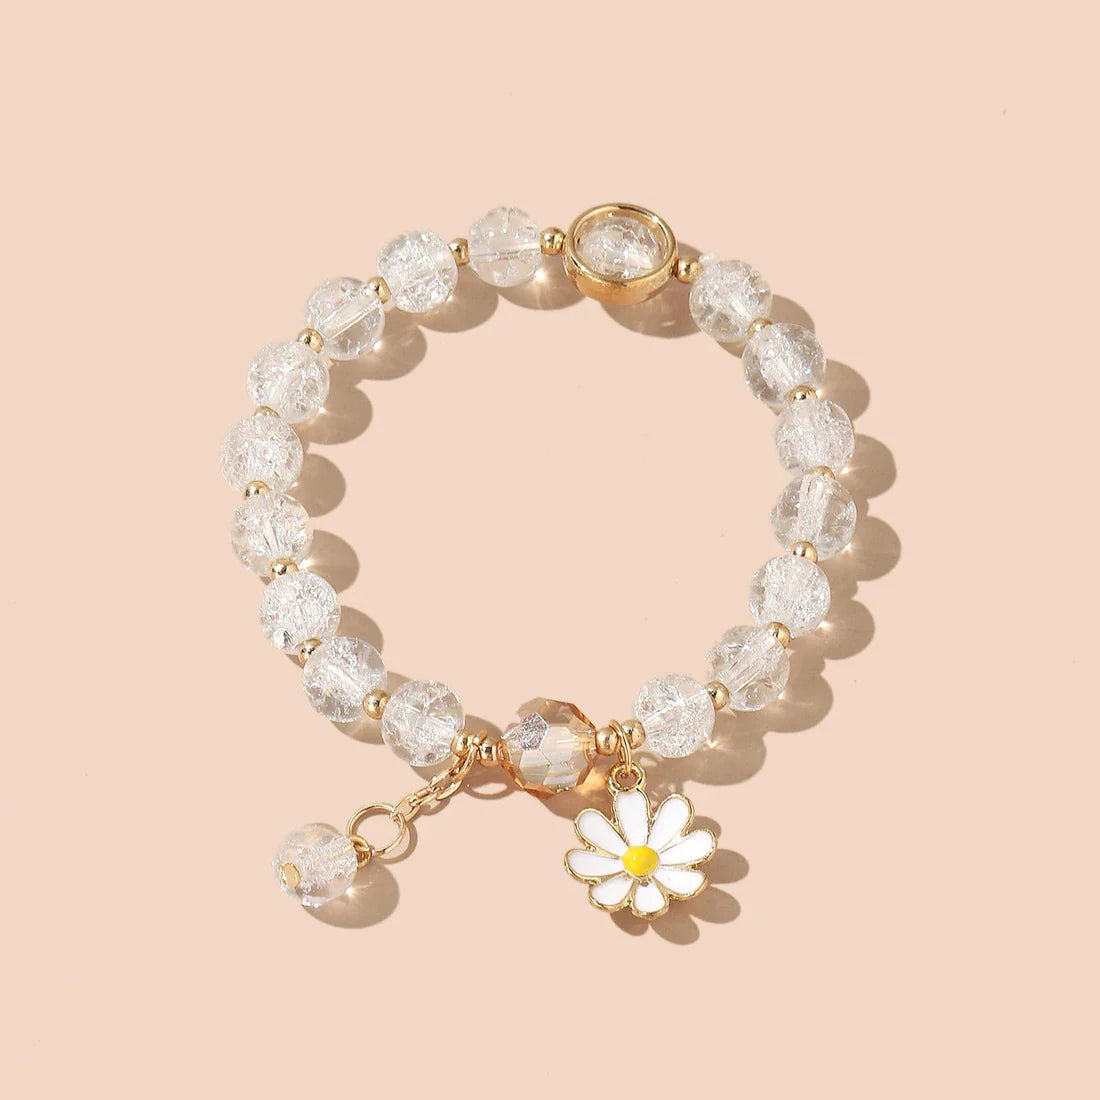 Embrace Nature's Beauty with our Fashion Flower Charm Beaded Bracelet